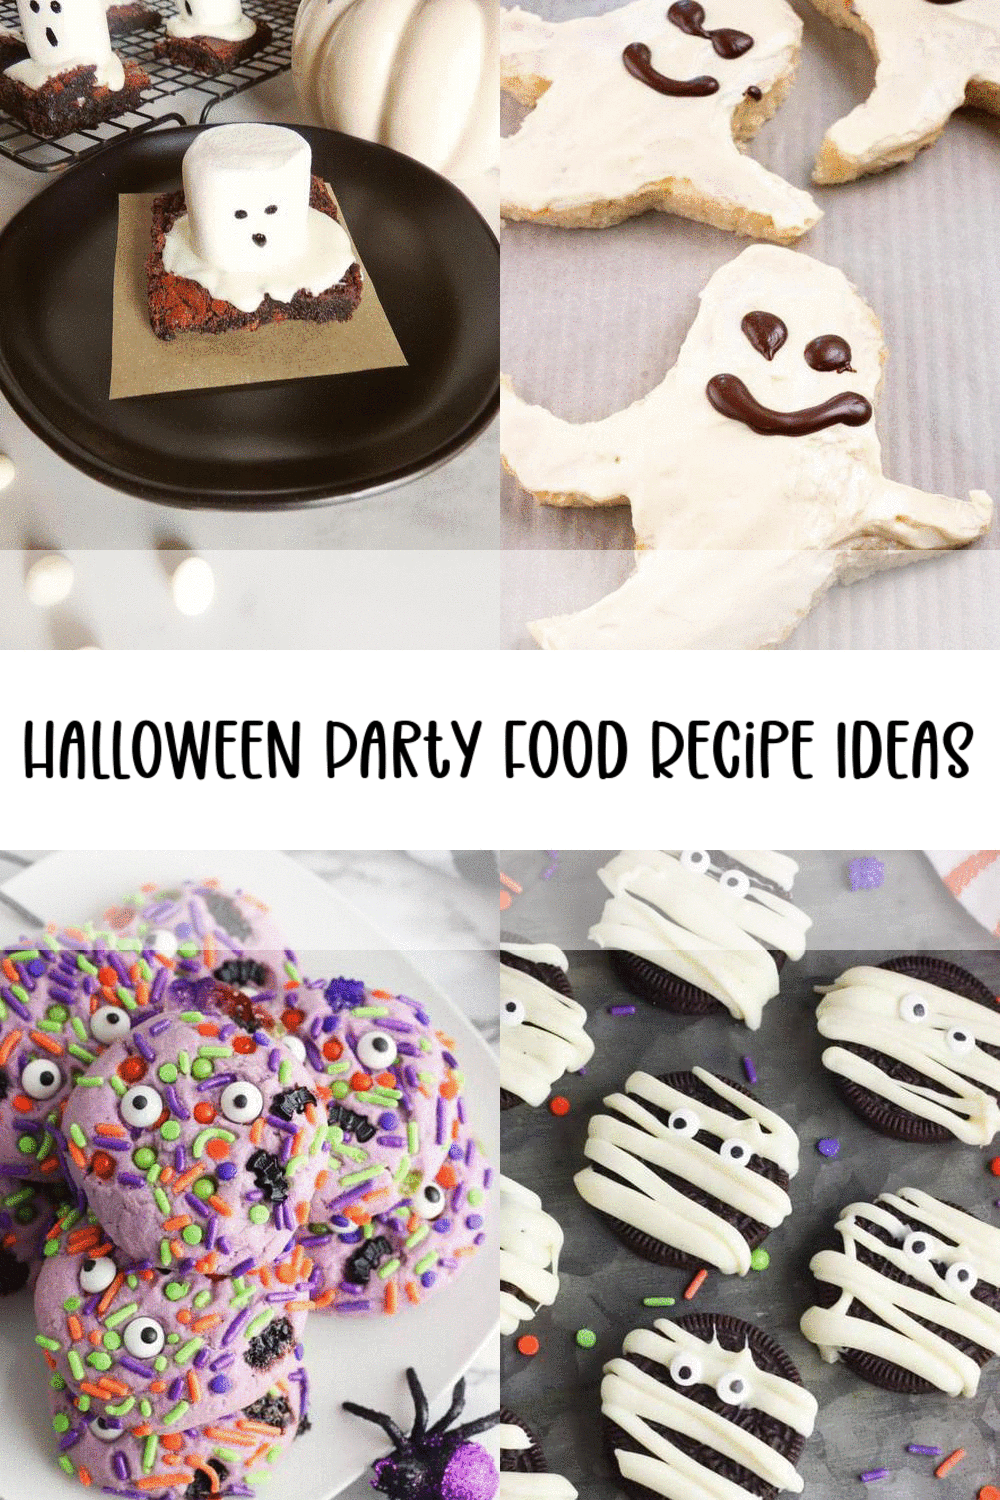 11 Halloween Party Food Recipes - Best Halloween Party Food Ideas